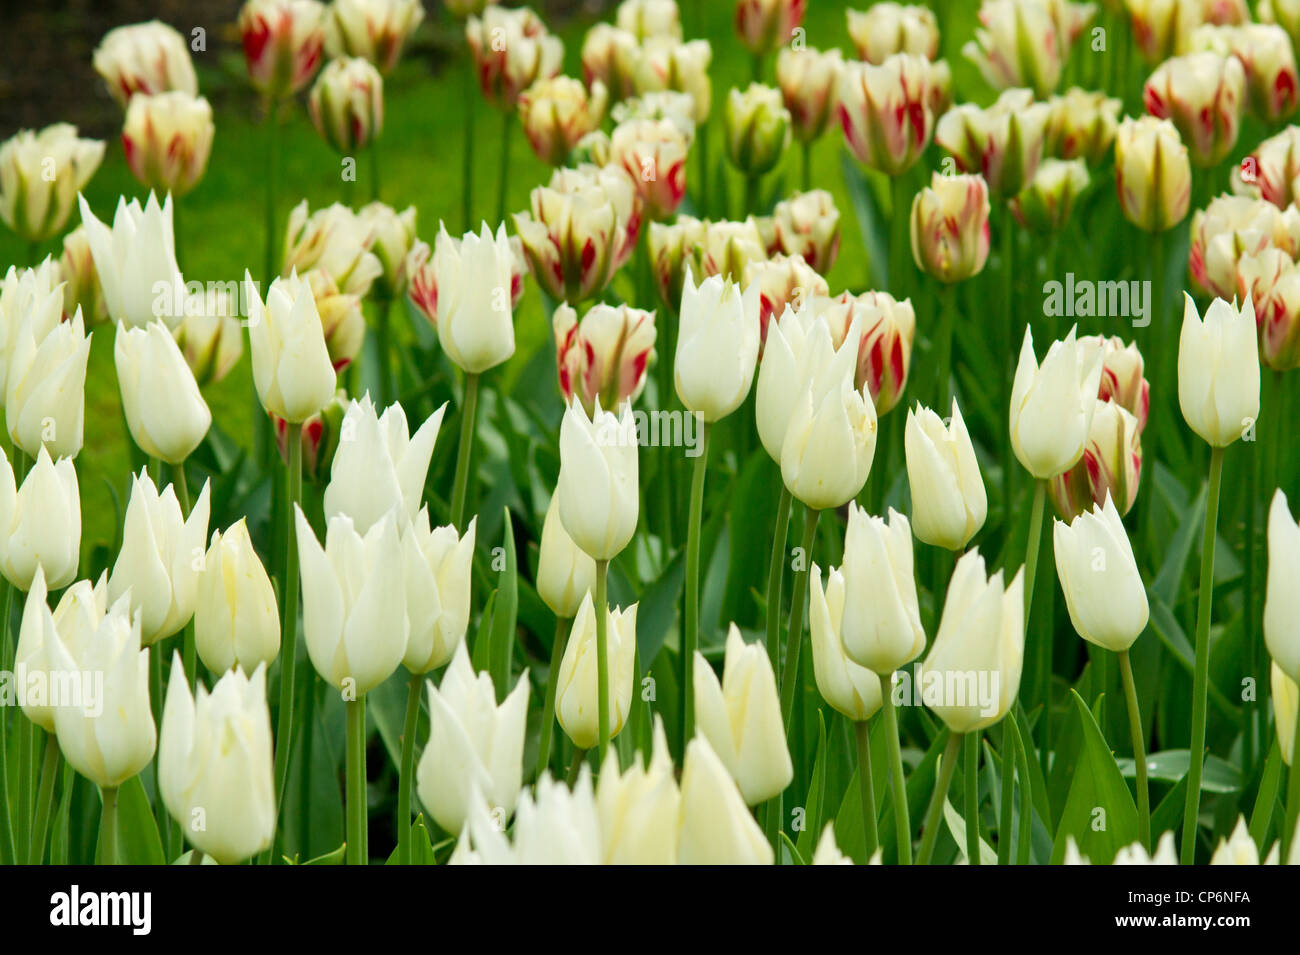 Mixed Tulips in a Field Stock Photo